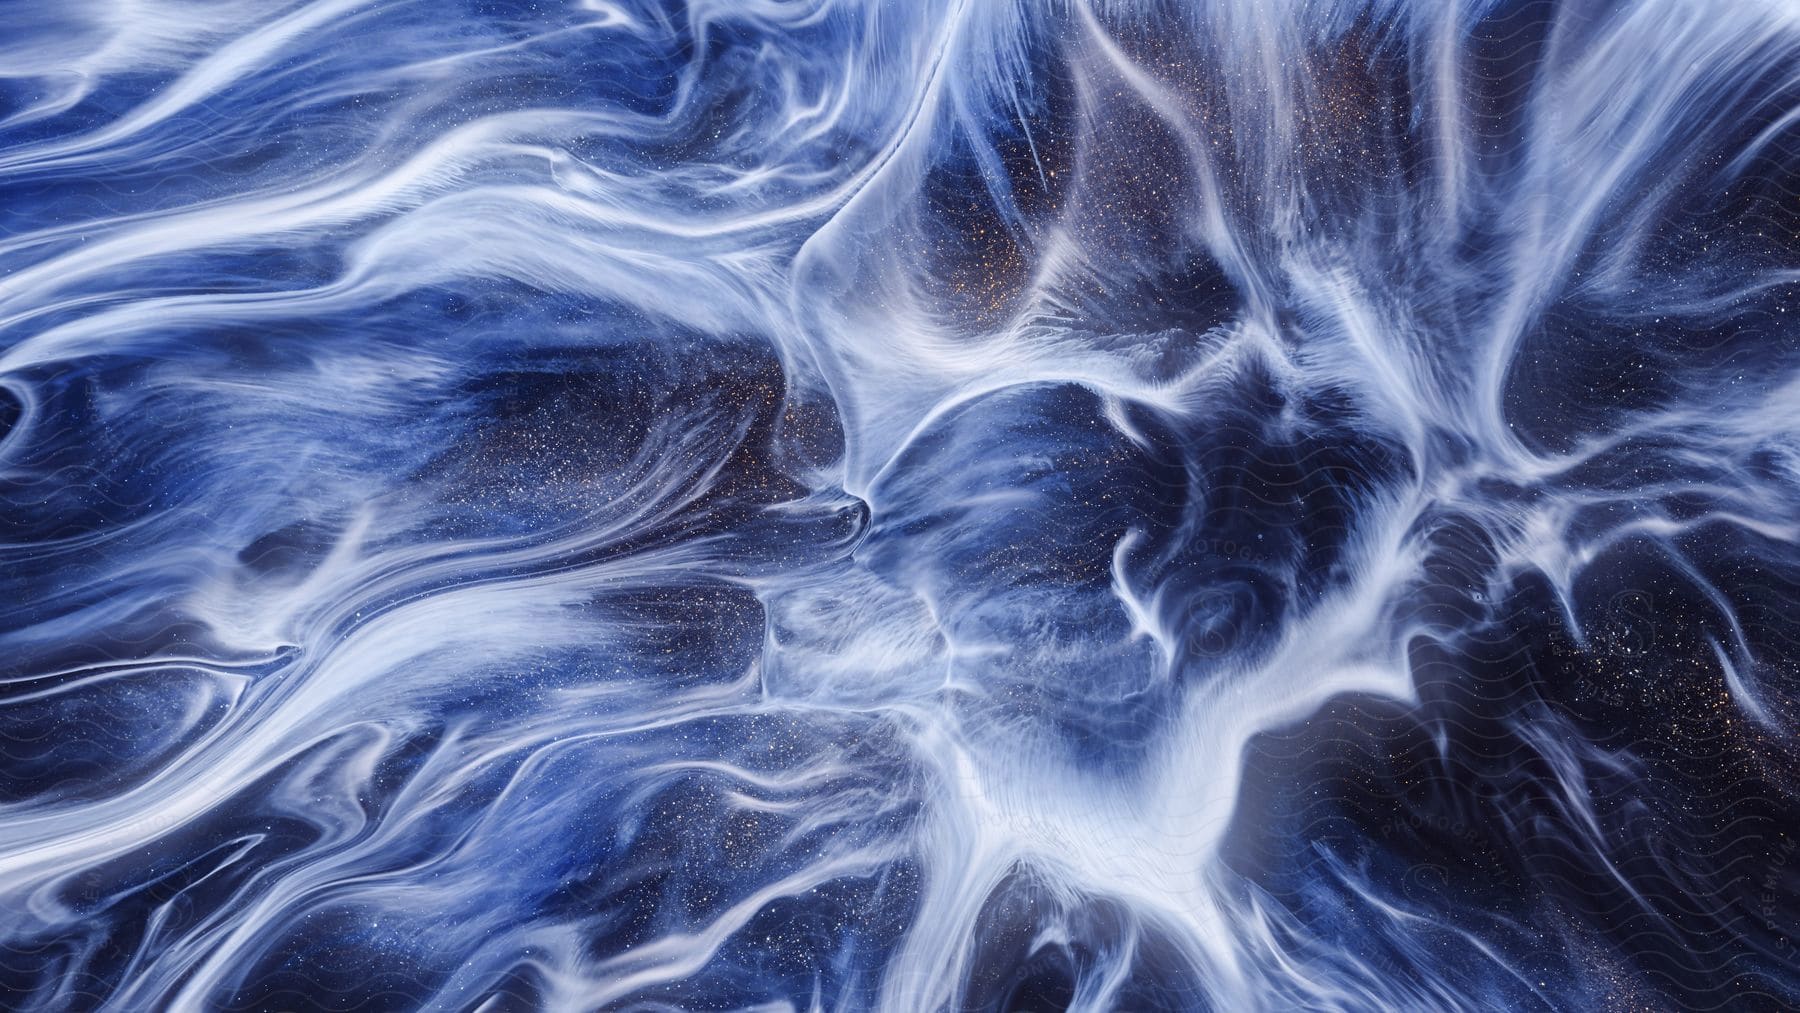 Abstract liquid marble art painting with a blackblue background and spilled white acrylic paint